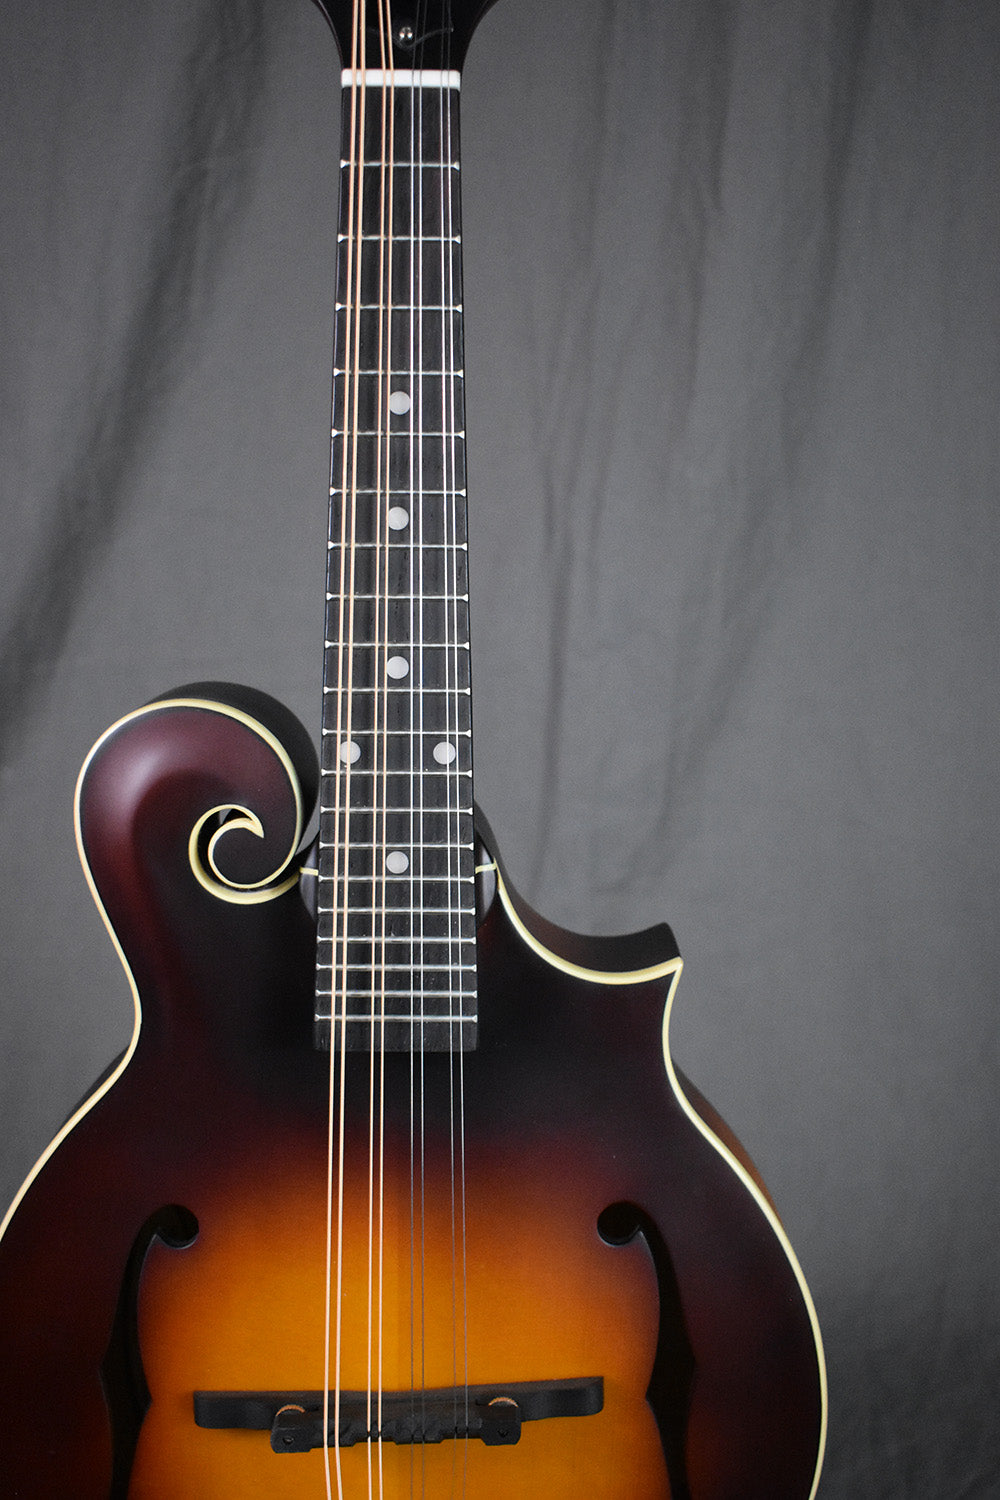 The Loar LM-590 All-Solid F-Style Contemporary Mandolin